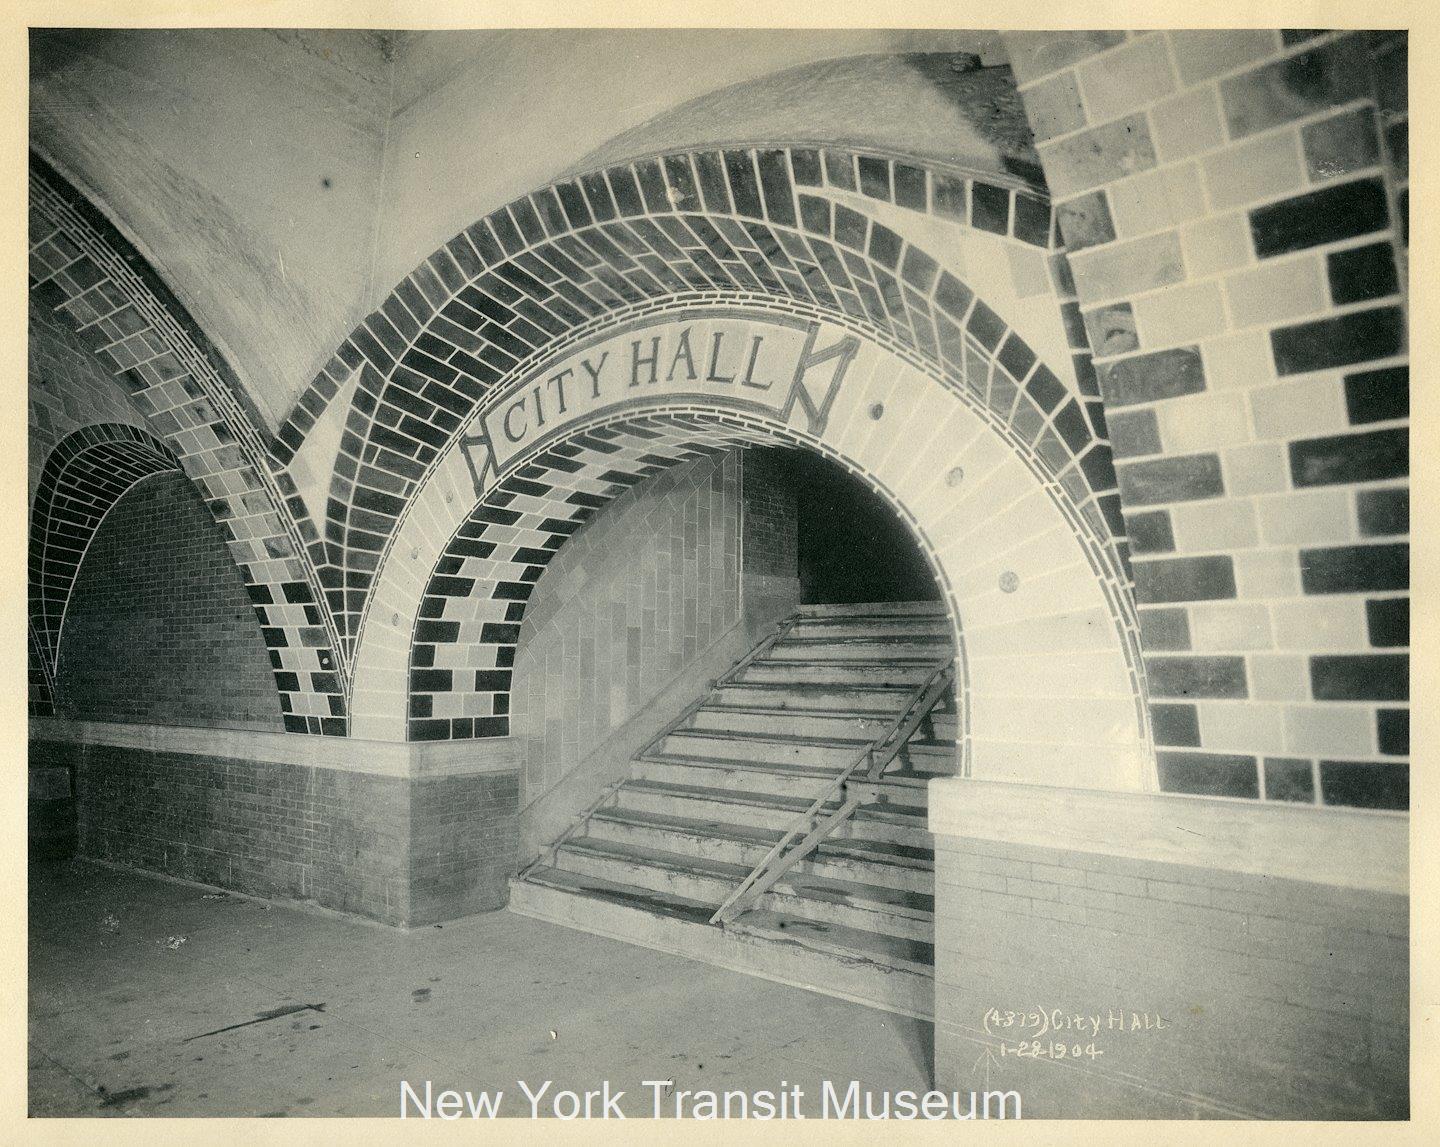 Black and white photograph of Old City Hall Station arch